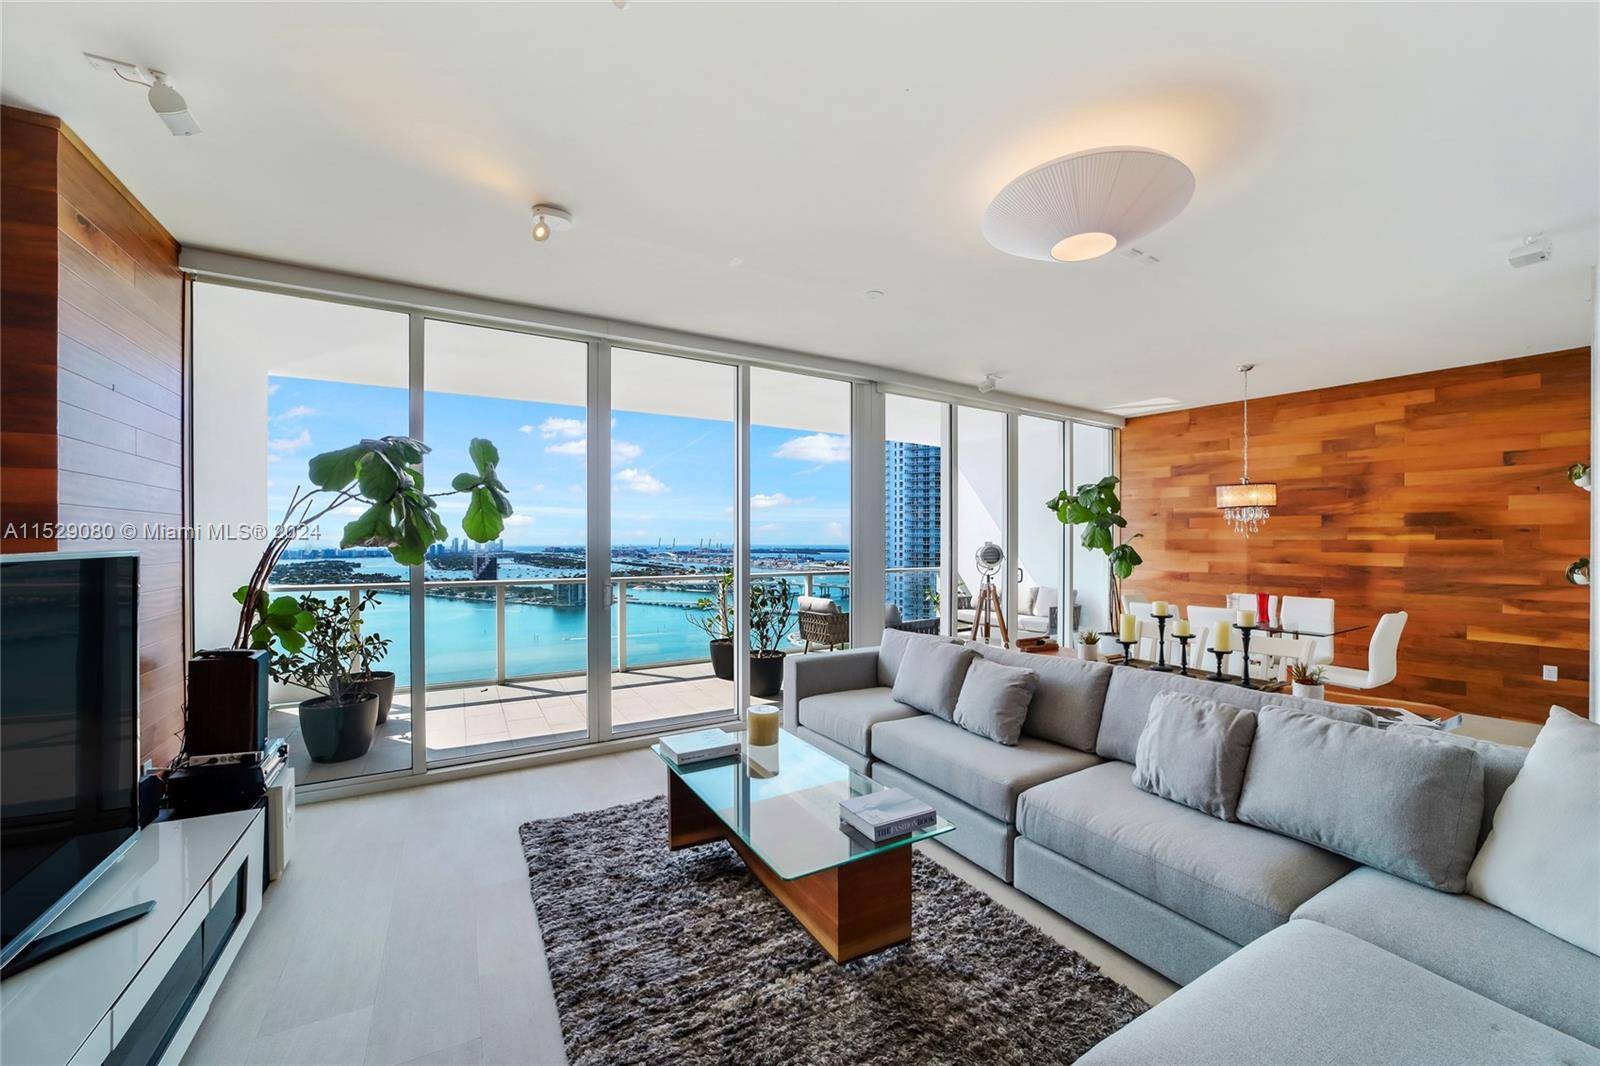 Available April 1st Stunning 4bed 5bath den Movie room with breath taking views of the Bay and the Ocean in an impeccable building, Paramount Bay.